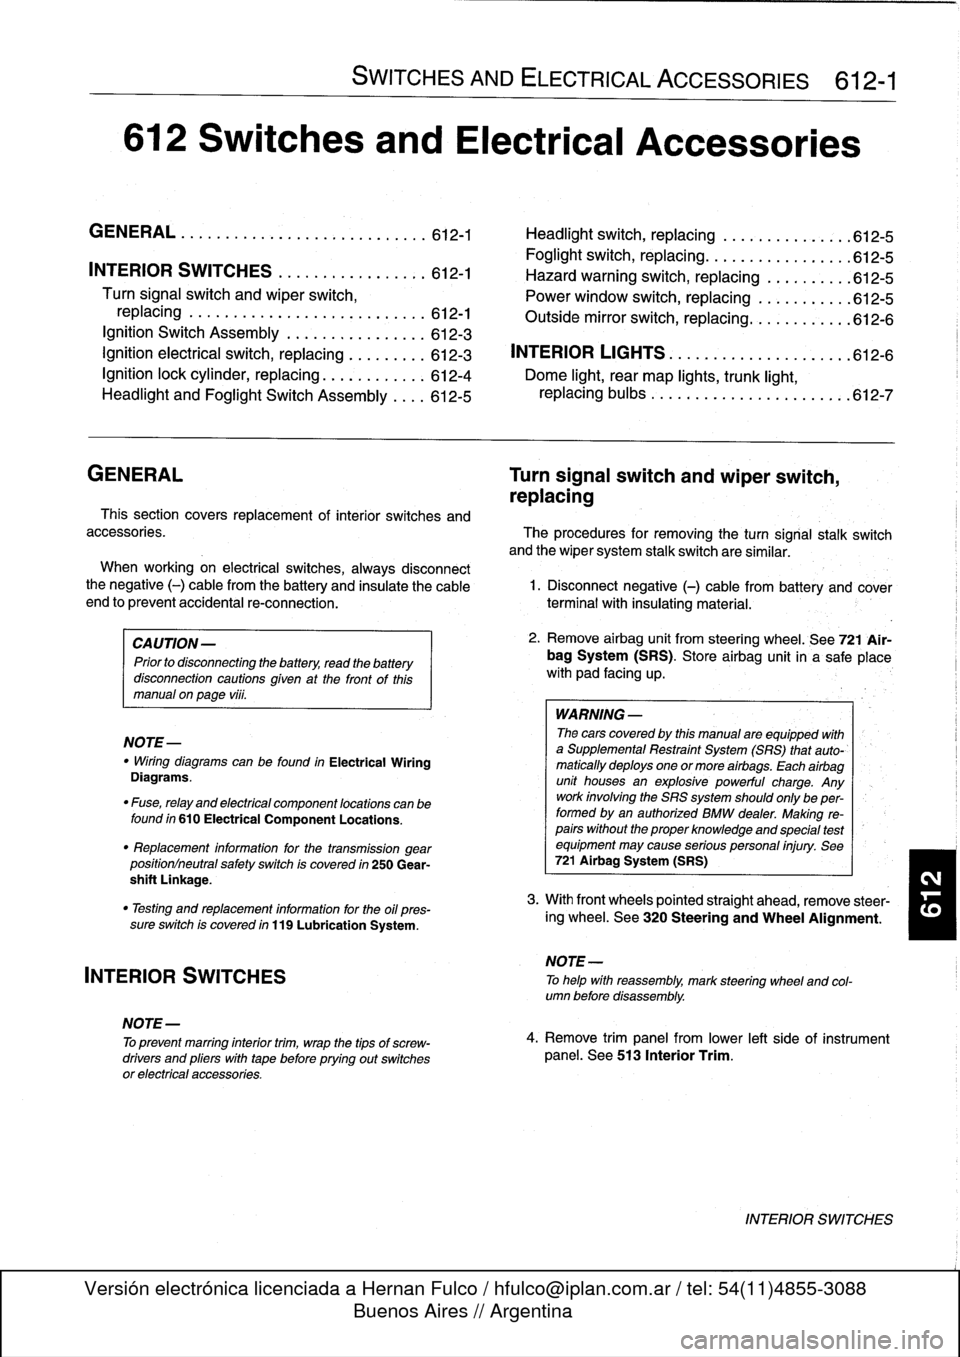 BMW 318i 1997 E36 Workshop Manual 
612
Switches
and
Electrical
Accessories

GENERAL
.
.
.
.
.
.
.
.
.
...
.
.
.
.
.
...
.
......
.612-1

	

Headlight
switch,
replacing

	

..
.
...
.
.
.
.
.
.
.
.
.
612-5

Foglight
switch,
replacing
.